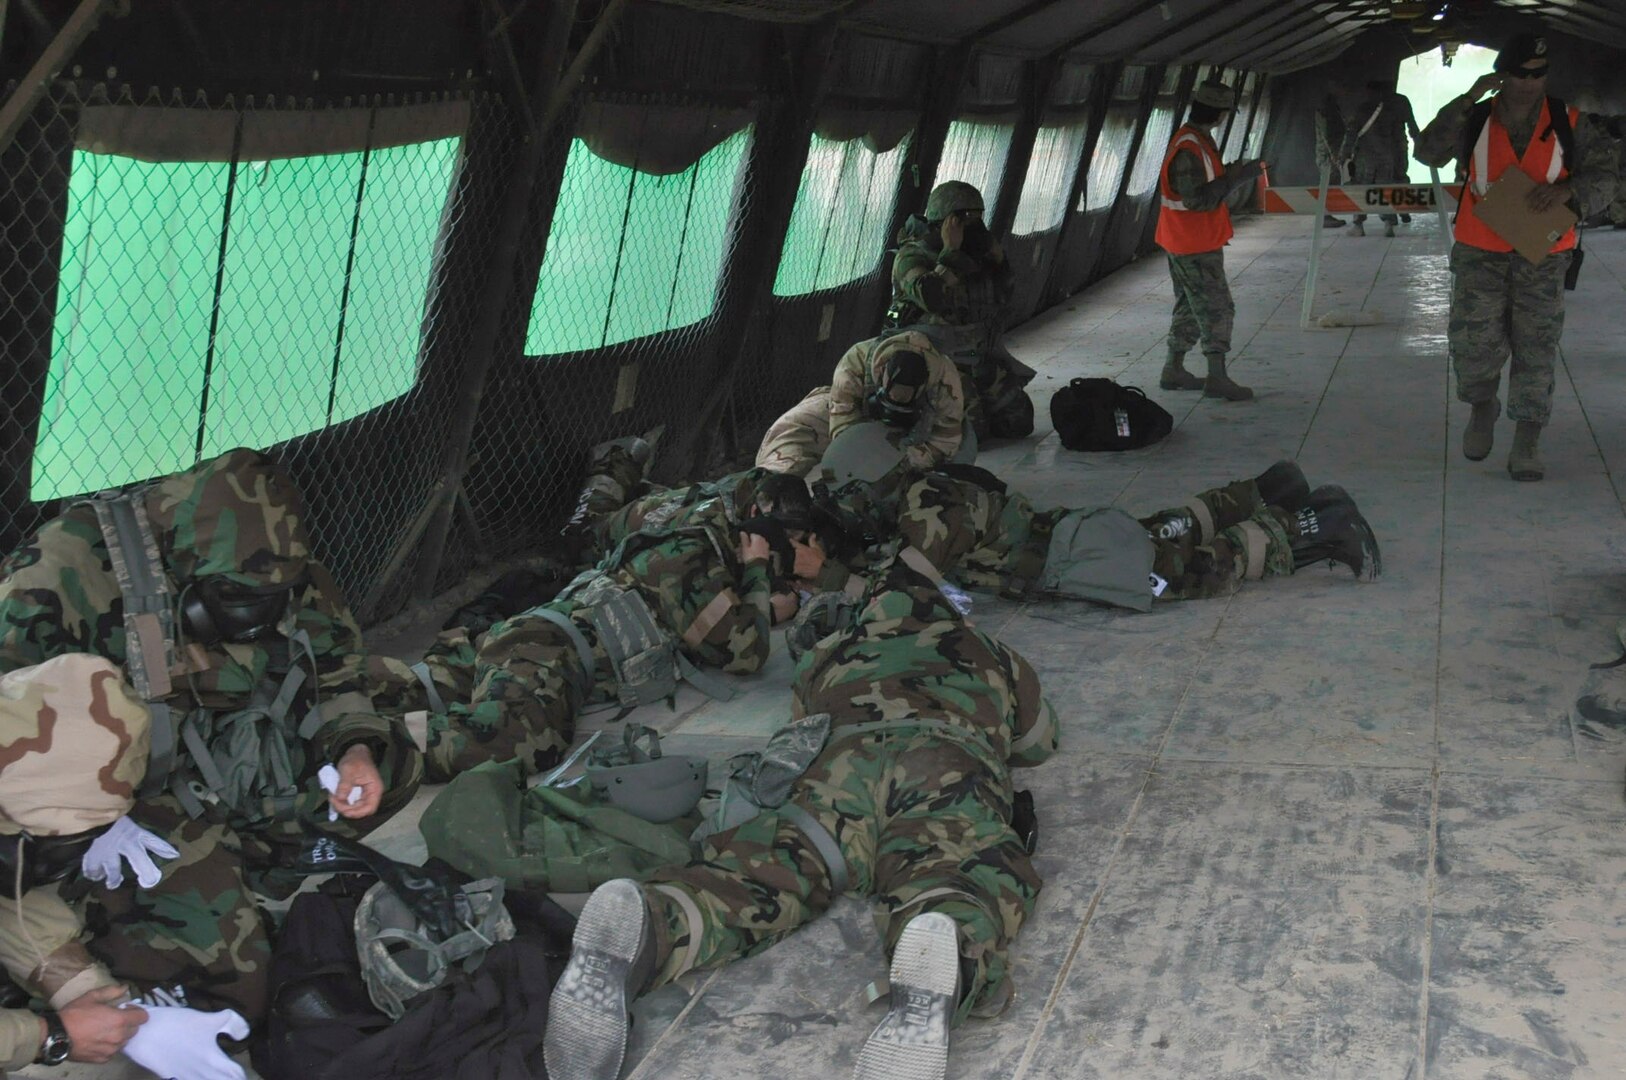 Members of the 433rd Operations Group react to a simulated attack by dropping to the ground and putting on their Mission Oriented Protective Posture gear during the Steel Thunder exercise Nov. 5, 2016 at Joint Base San Antonio-Lackland. Members were also required to observe what was going on during the attack and report it accurately. (U.S. Air Force photo/Senior Airman Bryan Swink)